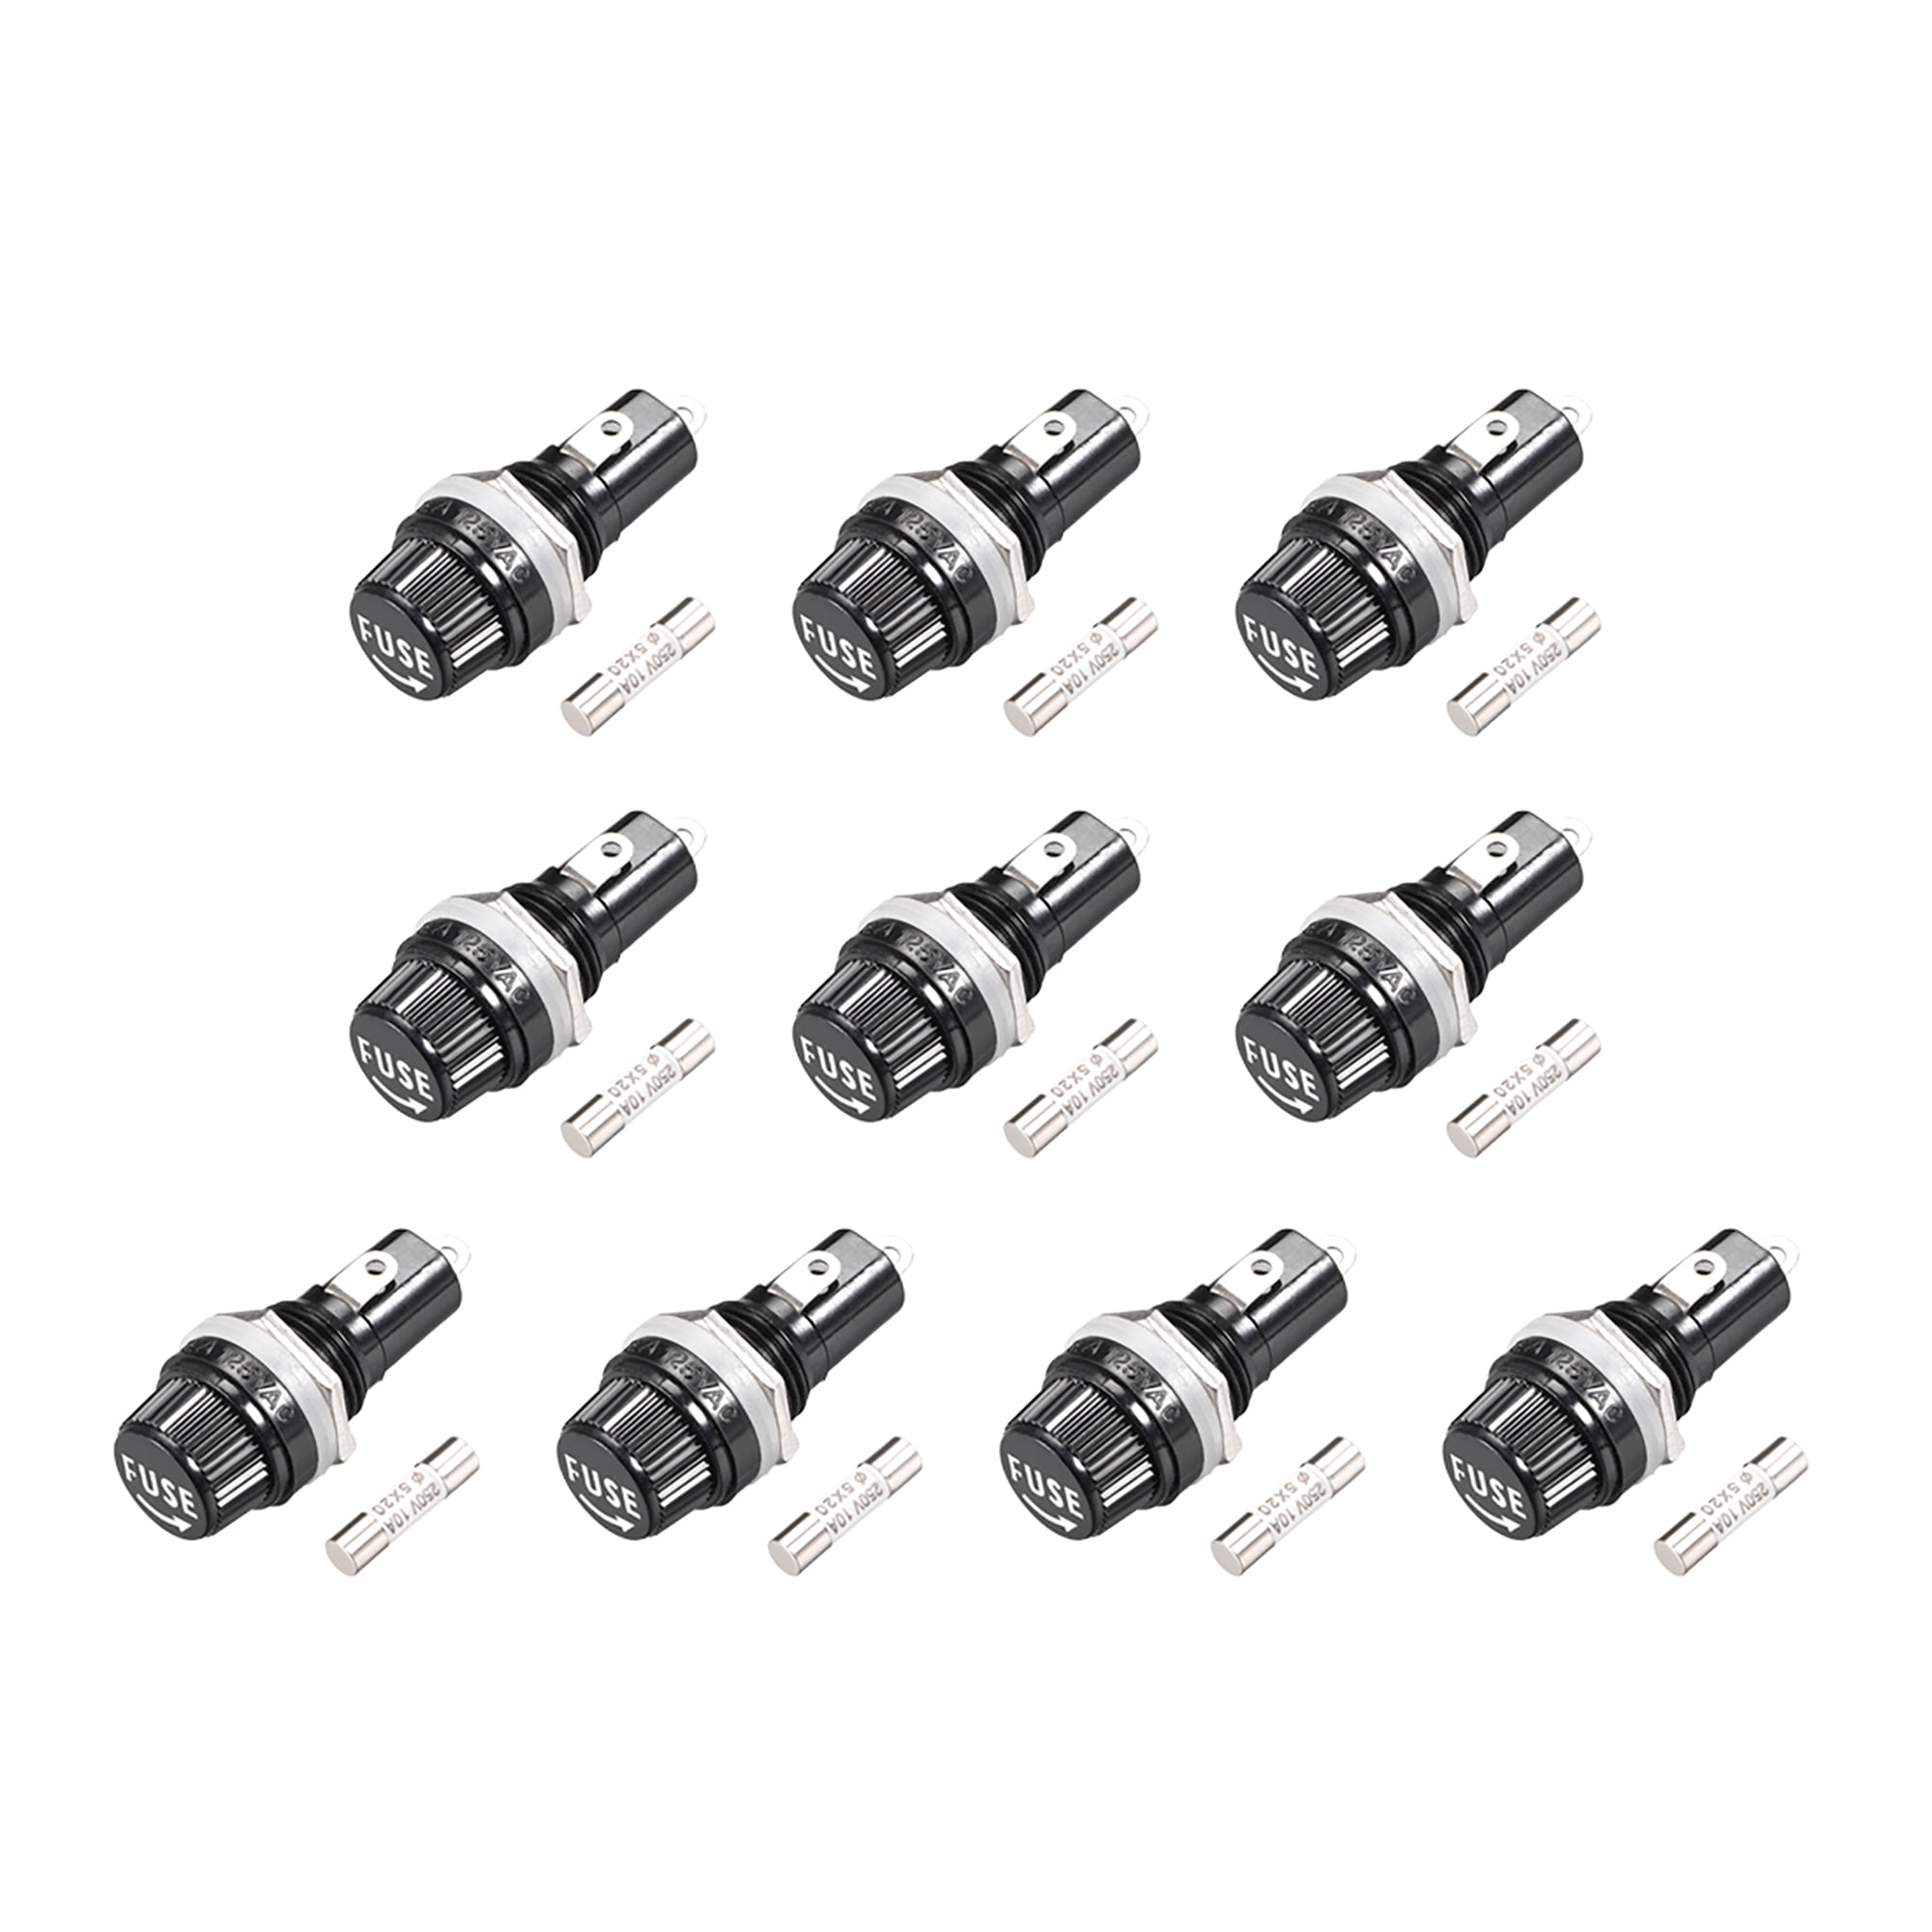 uxcell Screw Cap Panel Mounted Fuse Holder AC 125V/15A 250V/10A with 5 x 20mm Ceramics Fuse 10Set 